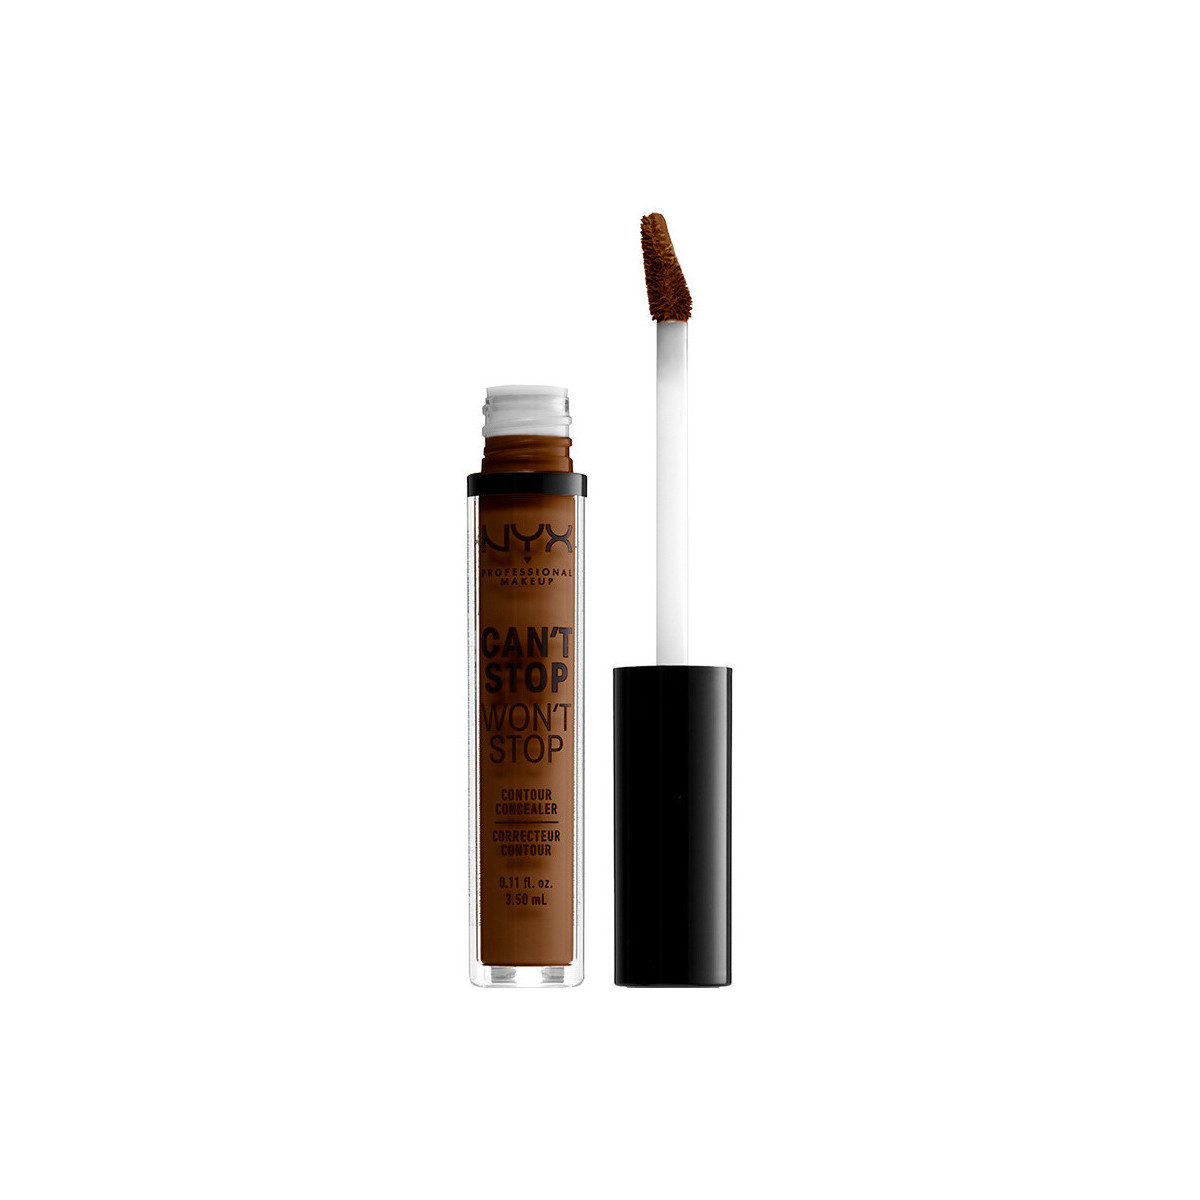 Beauty Make-up & Foundation  Nyx Professional Make Up Can't Stop Won't Stop Contour Concealer walnut 